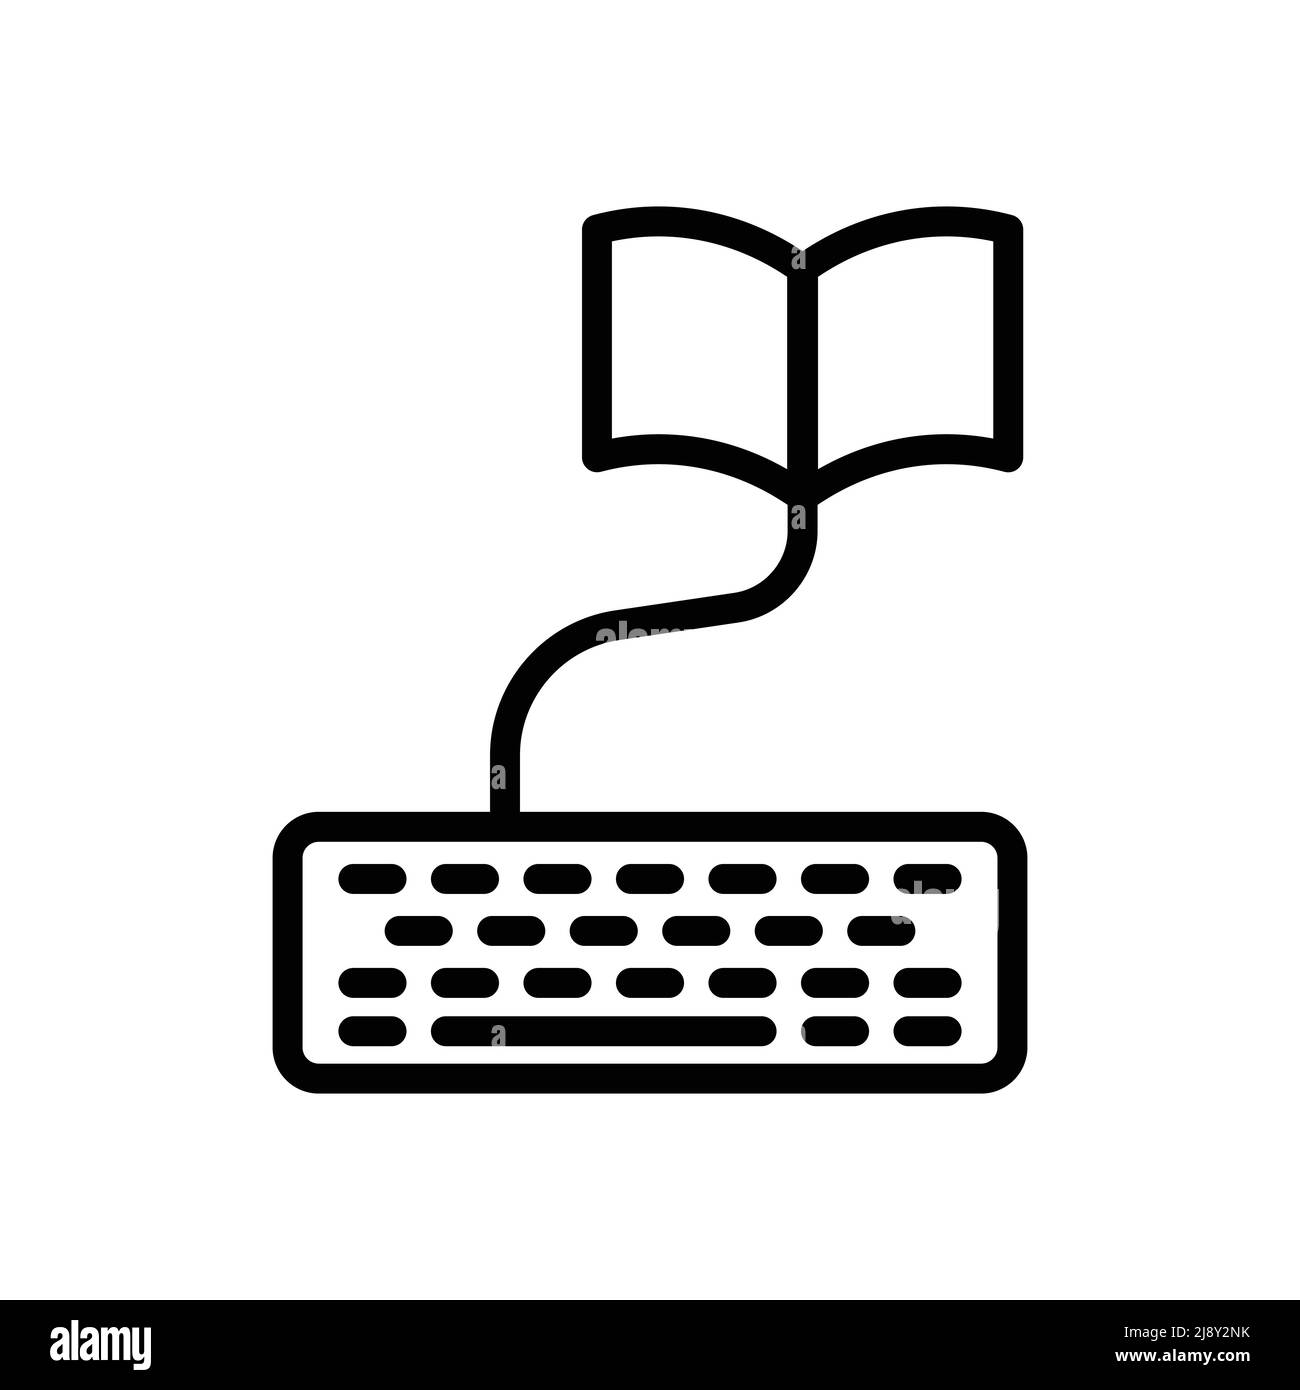 vector icon Input data online. keyboard, open book. Line icon style. Simple design illustration editable Stock Vector